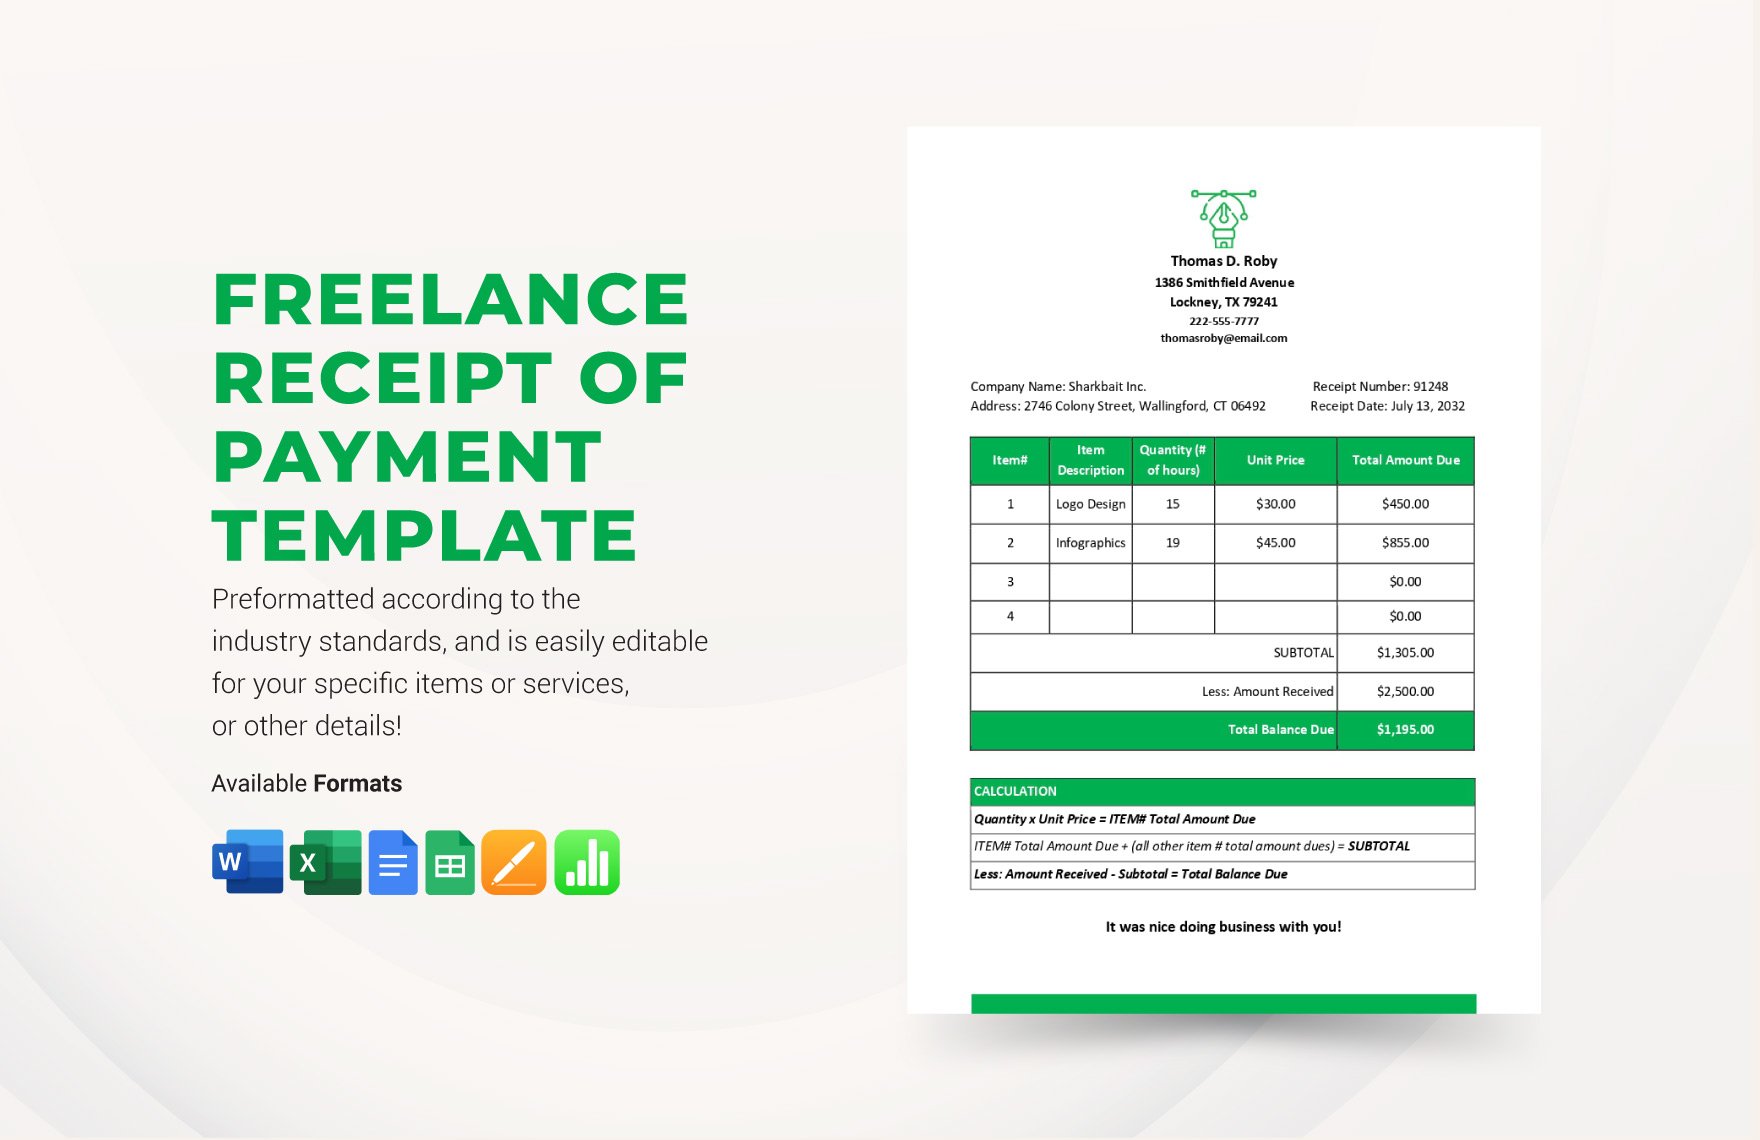 Freelance Receipt of Payment Template in Word, Google Docs, Excel, Google Sheets, Apple Pages, Apple Numbers